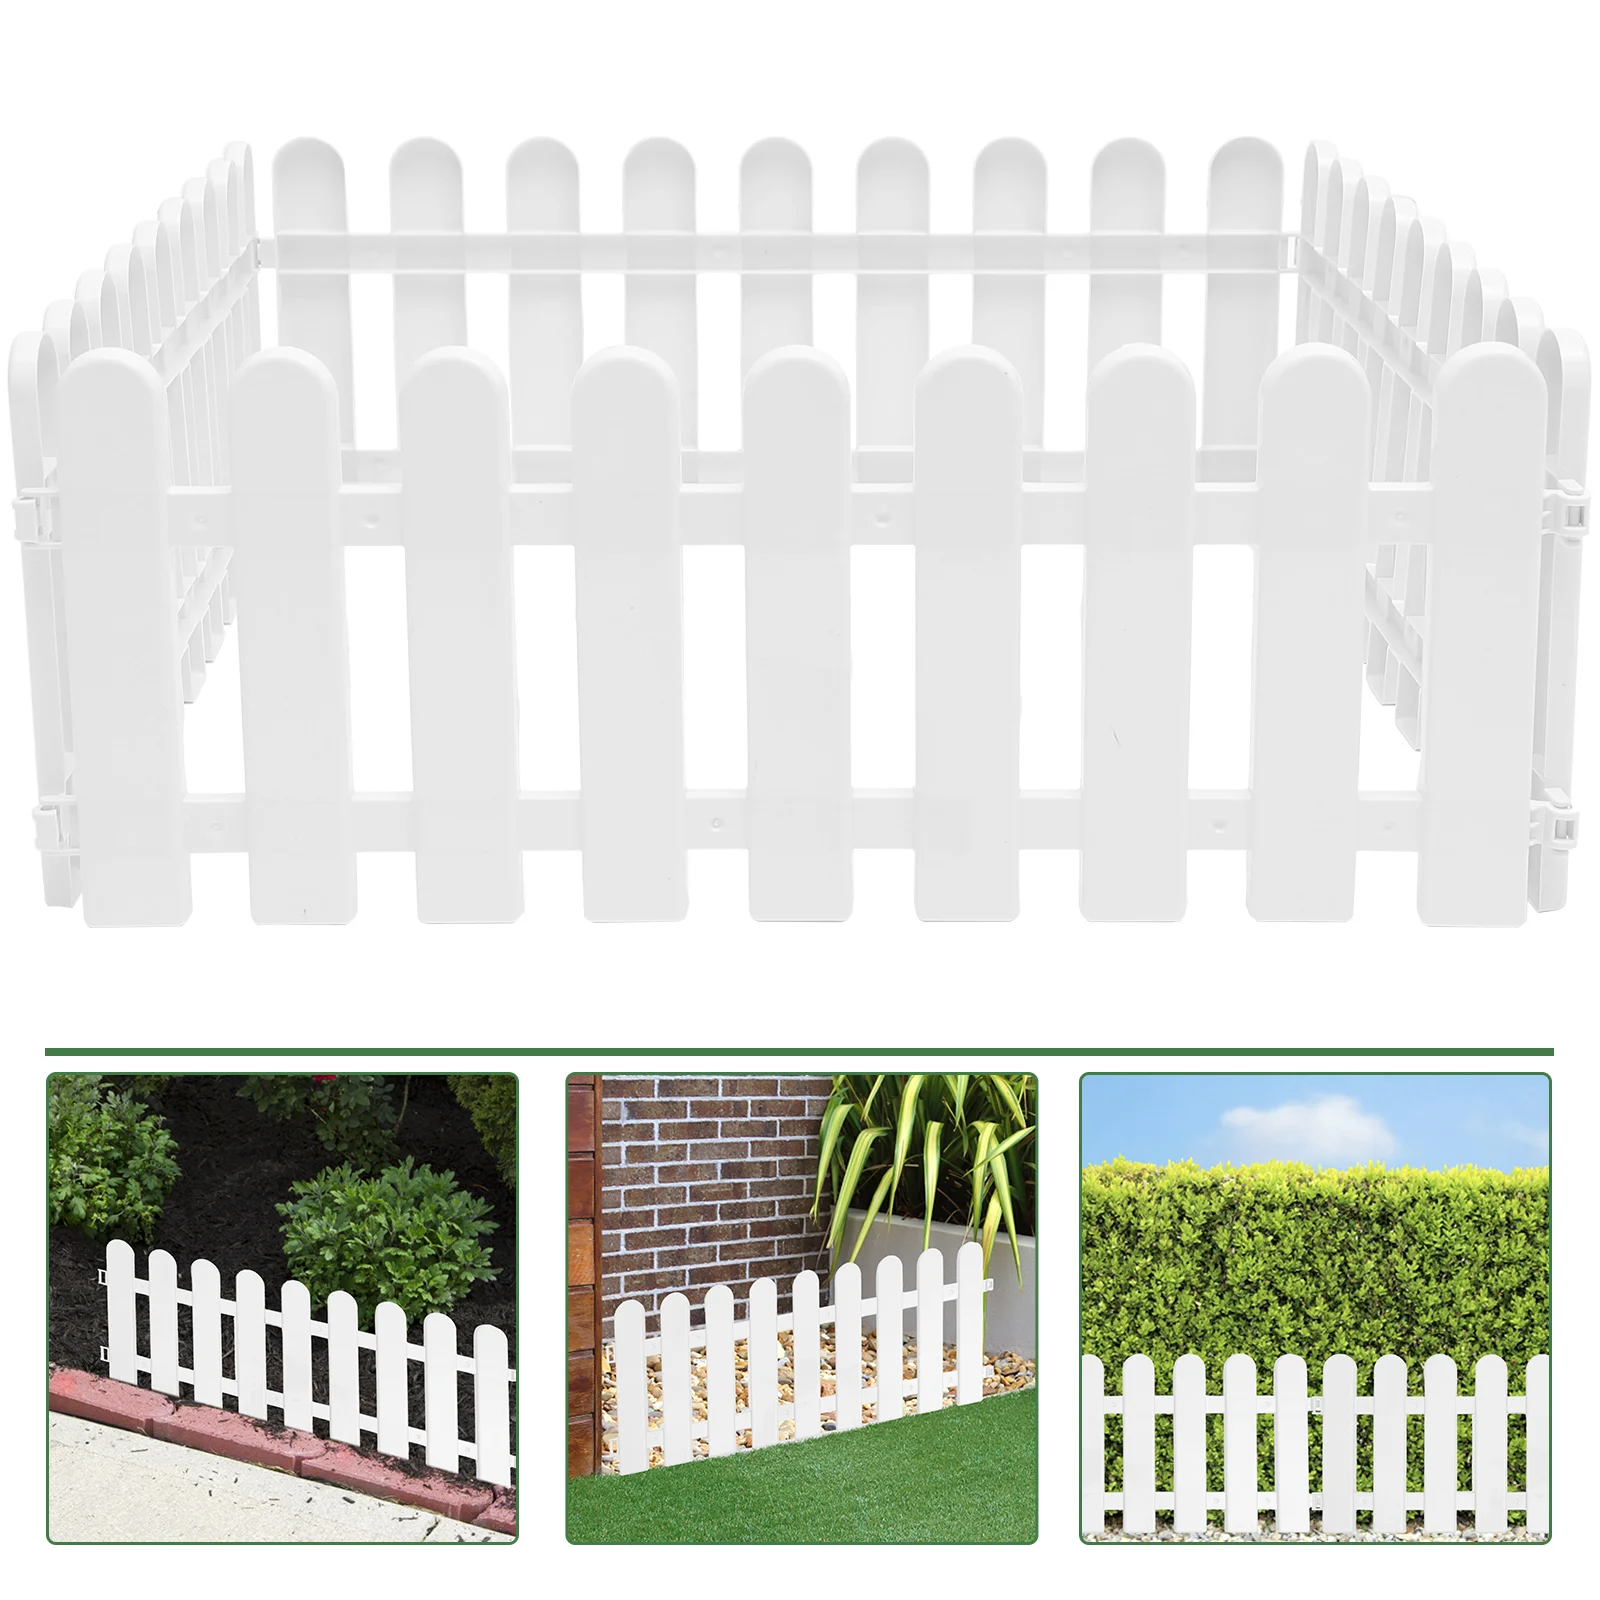 

4 Pcs The Fence Yard Outdoor Adornment Playpen Pets Dog Decorative House Landscape Border Patio Temporary Fencing